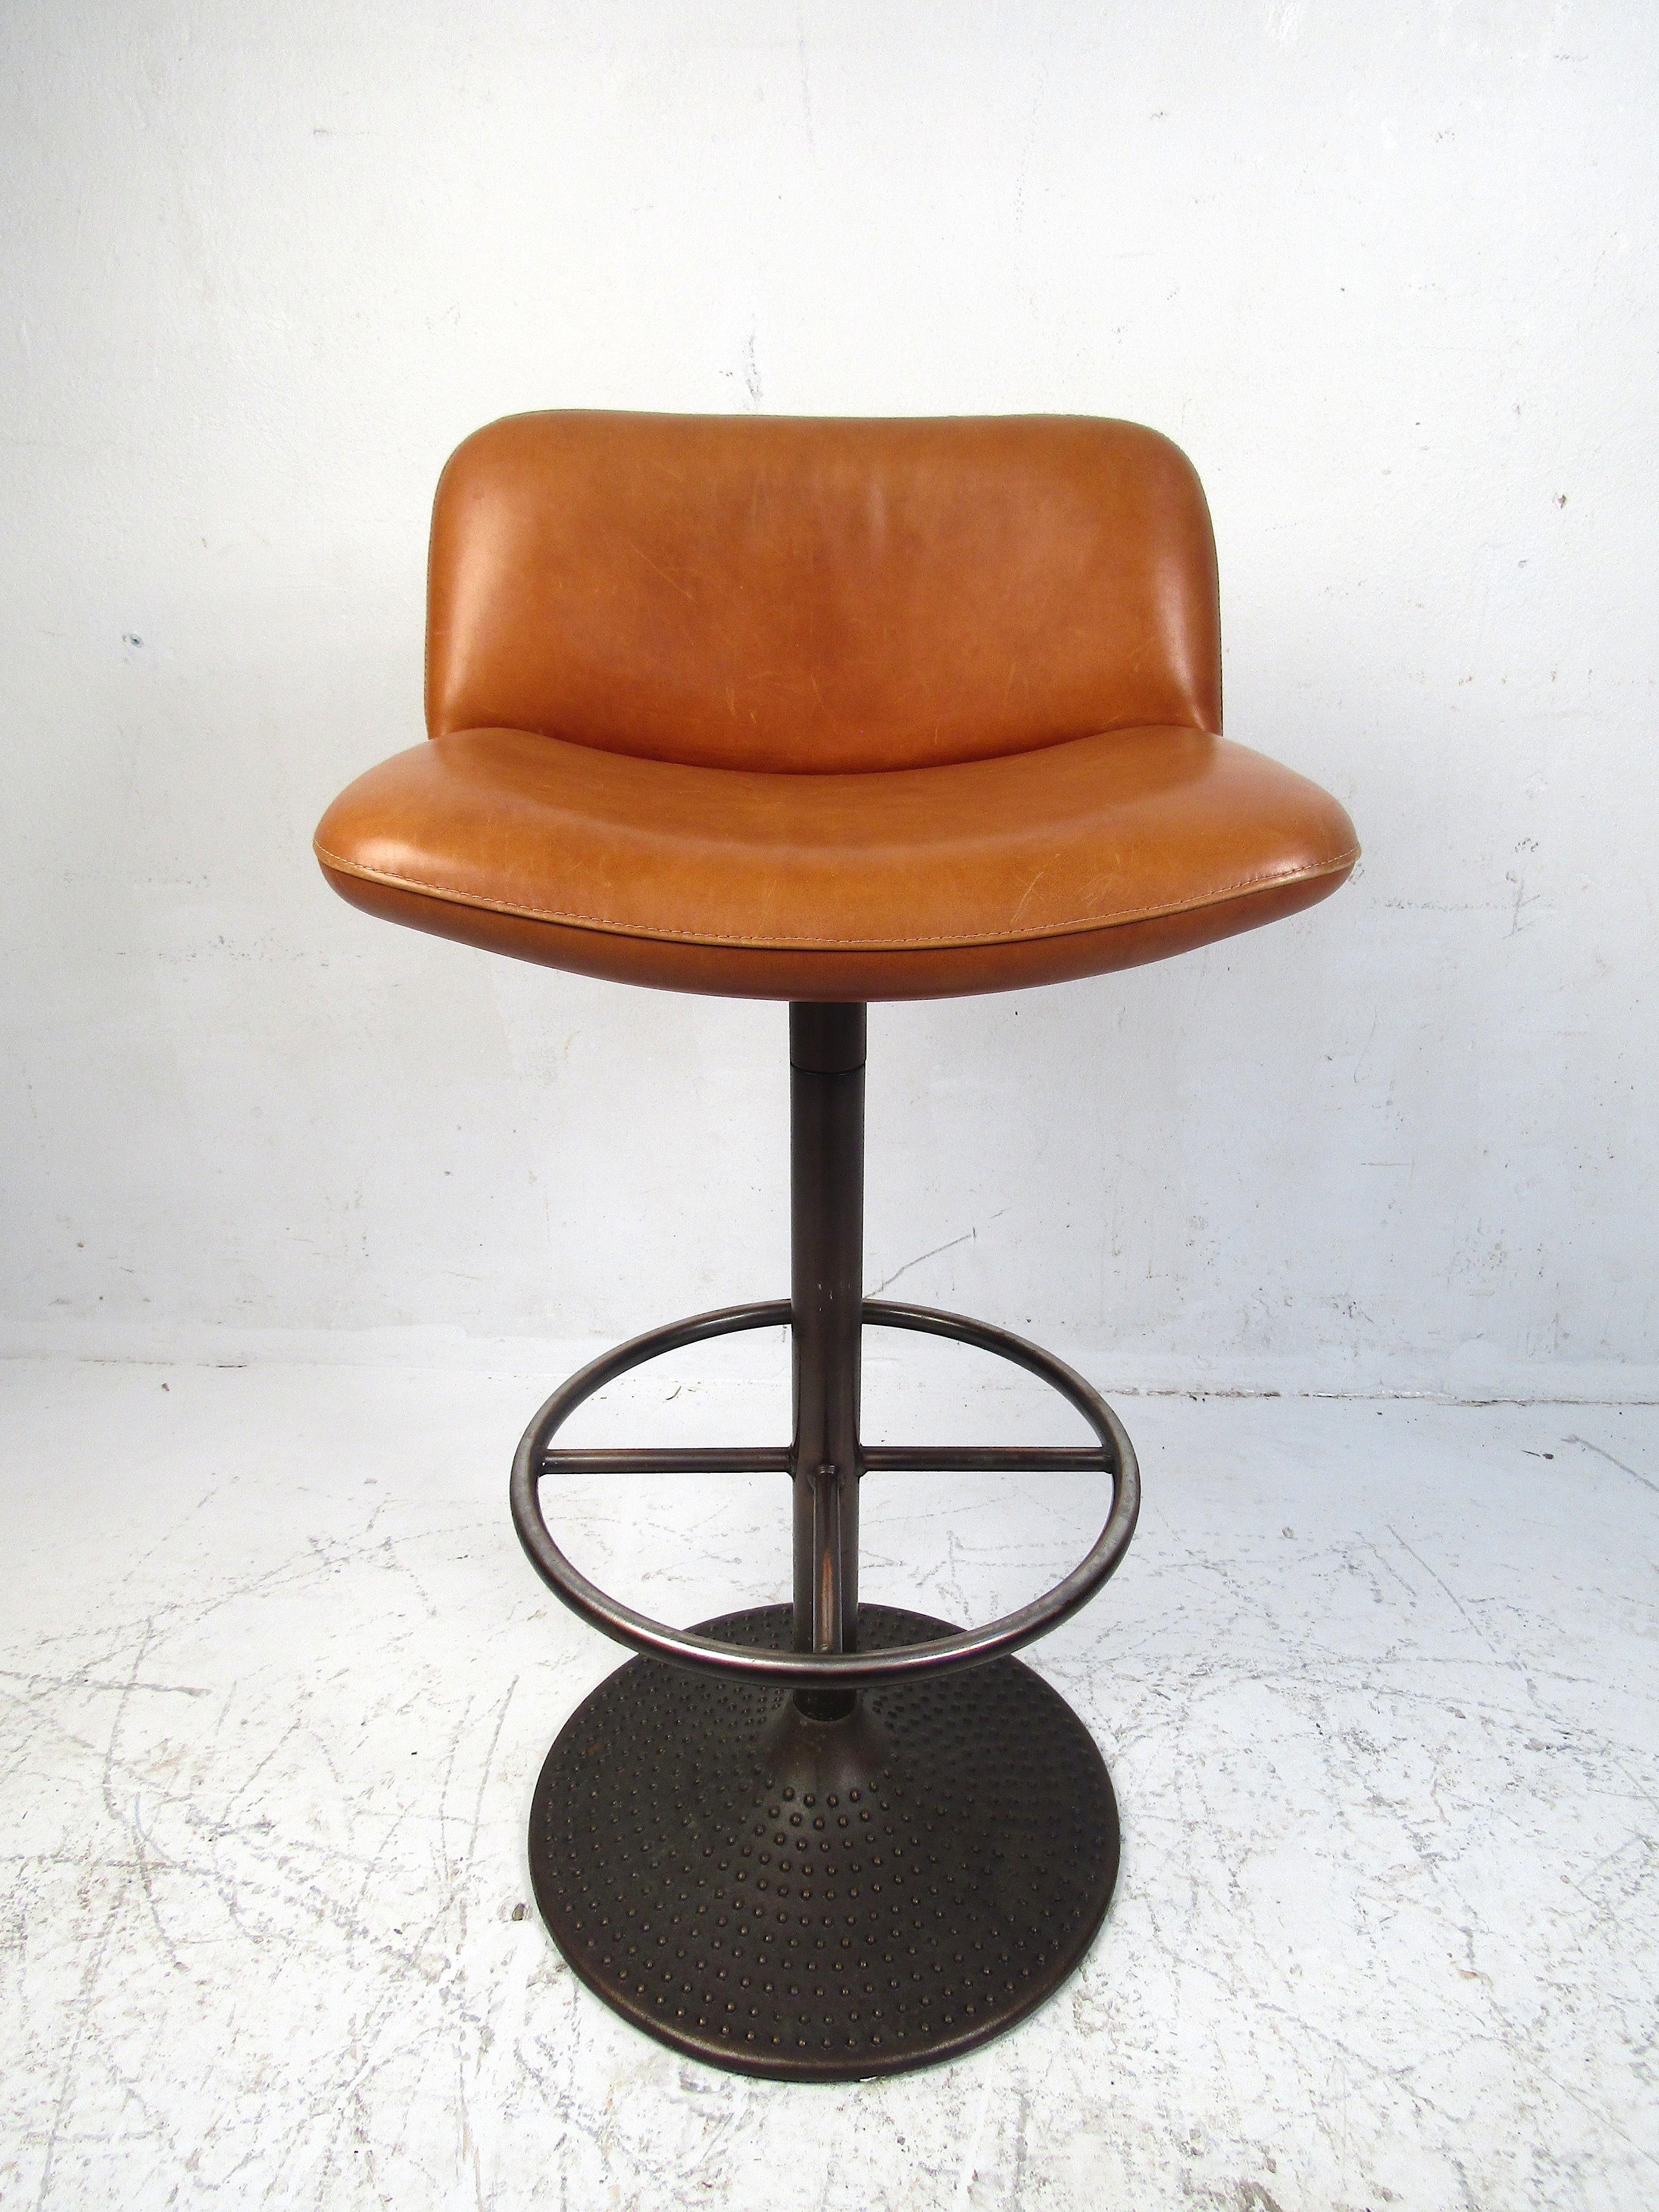 Stylish set of four upholstered swiveling bar stools. Sturdy metal base and stem with an interesting studded pattern adorning the base of the stools. Covered in a vintage orange faux-leather upholstery. Nice set sure to complement any modern